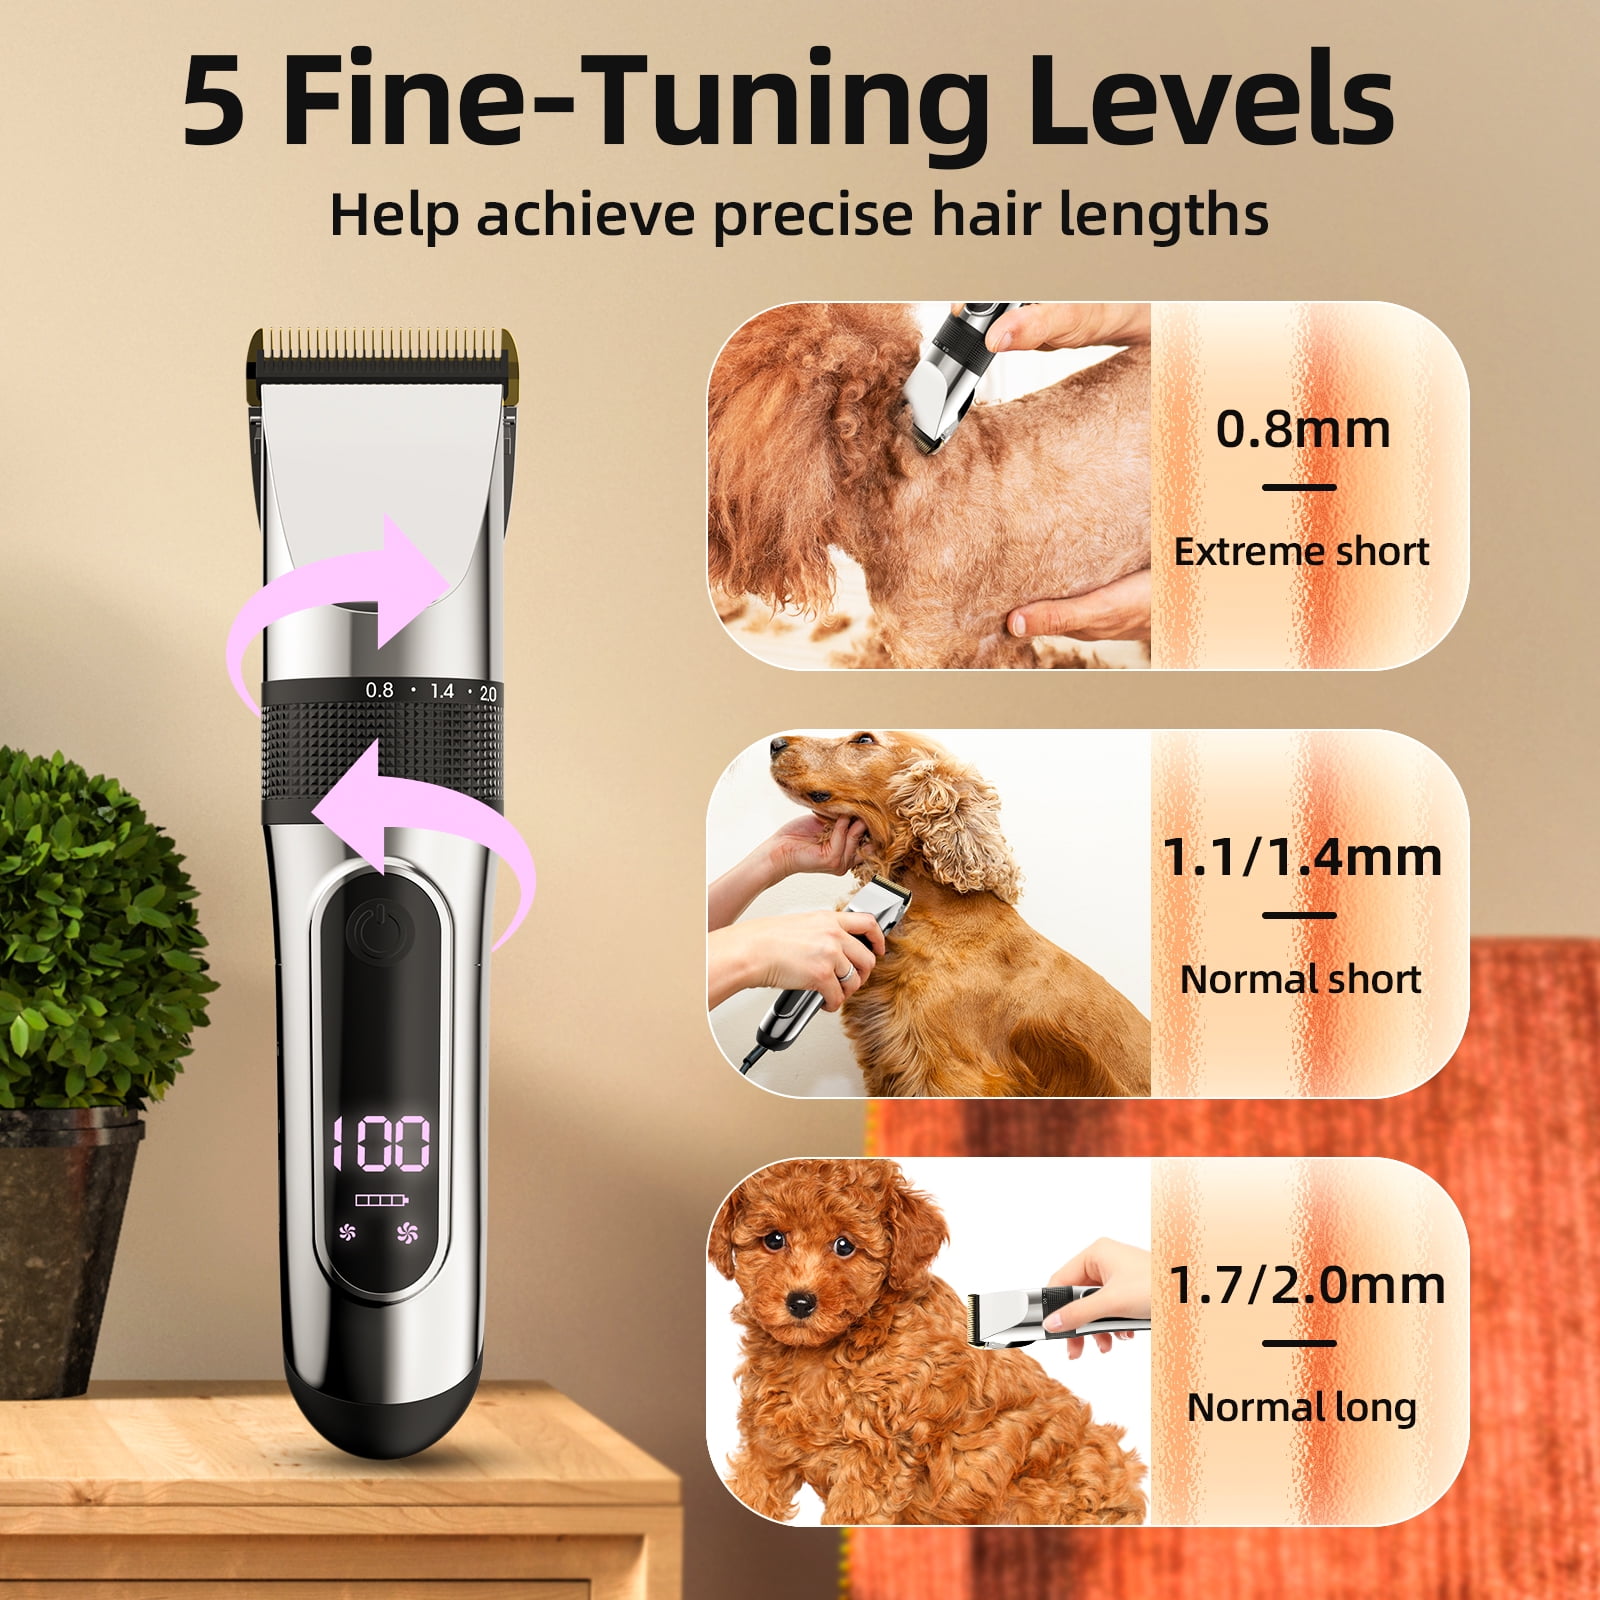 Lovav Dog Clippers Washable,2 in 1 Dog Grooming Clippers Kit,Professional Dog Trimmers Clippers Cordless,Low Noise Dog Shaver USB Rechargeable,Pet Clippers for Dogs,Cats,Rabbits and More 